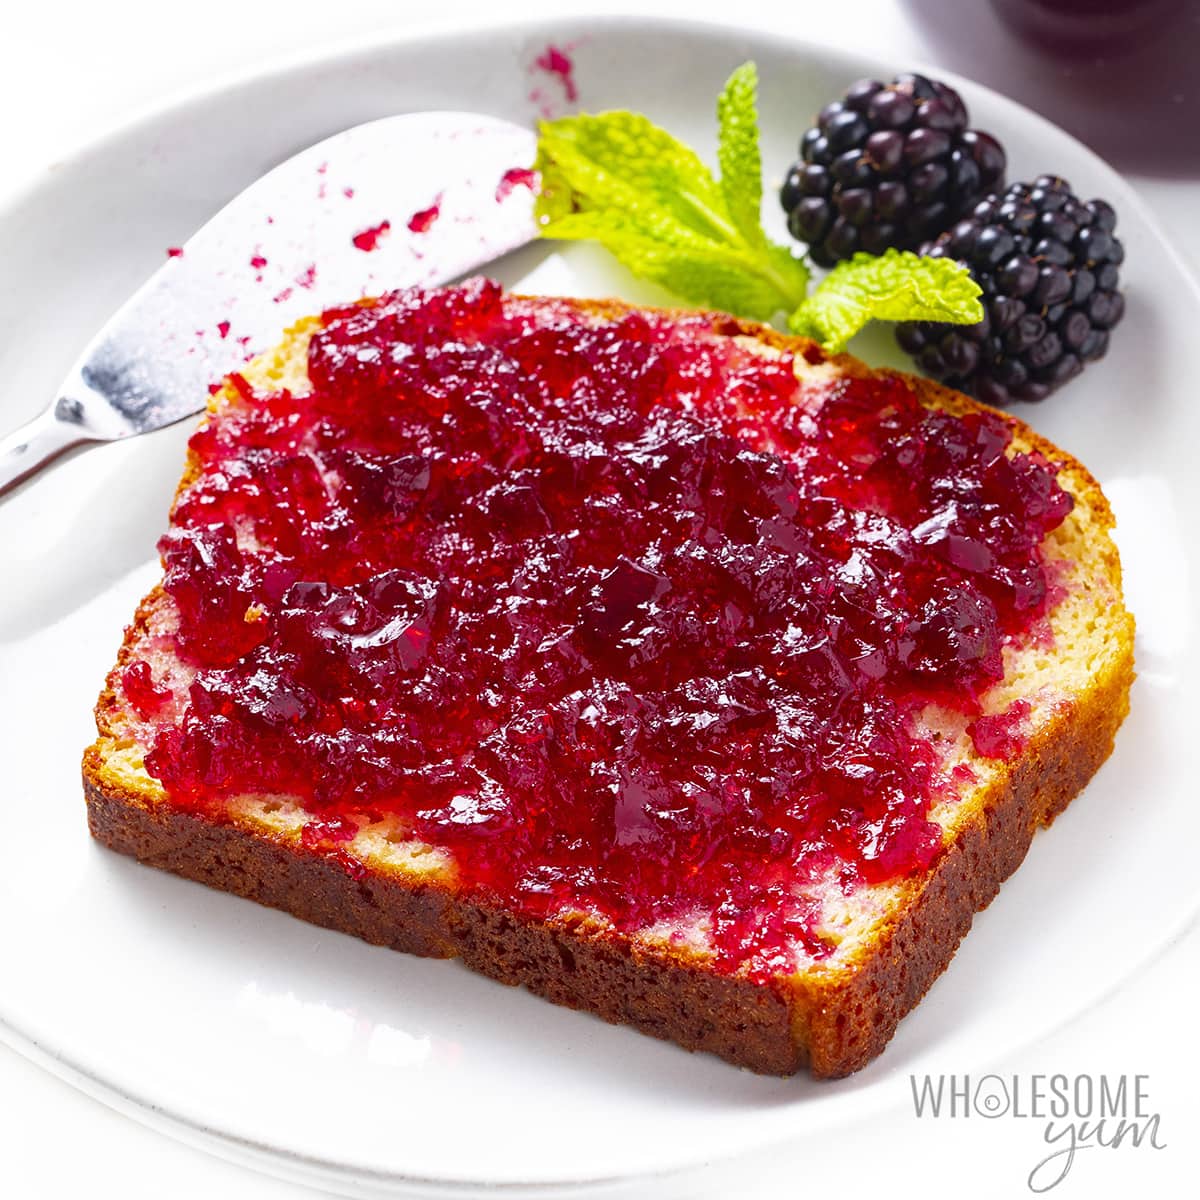 Keto jelly recipe shown on a slice of low carb bread